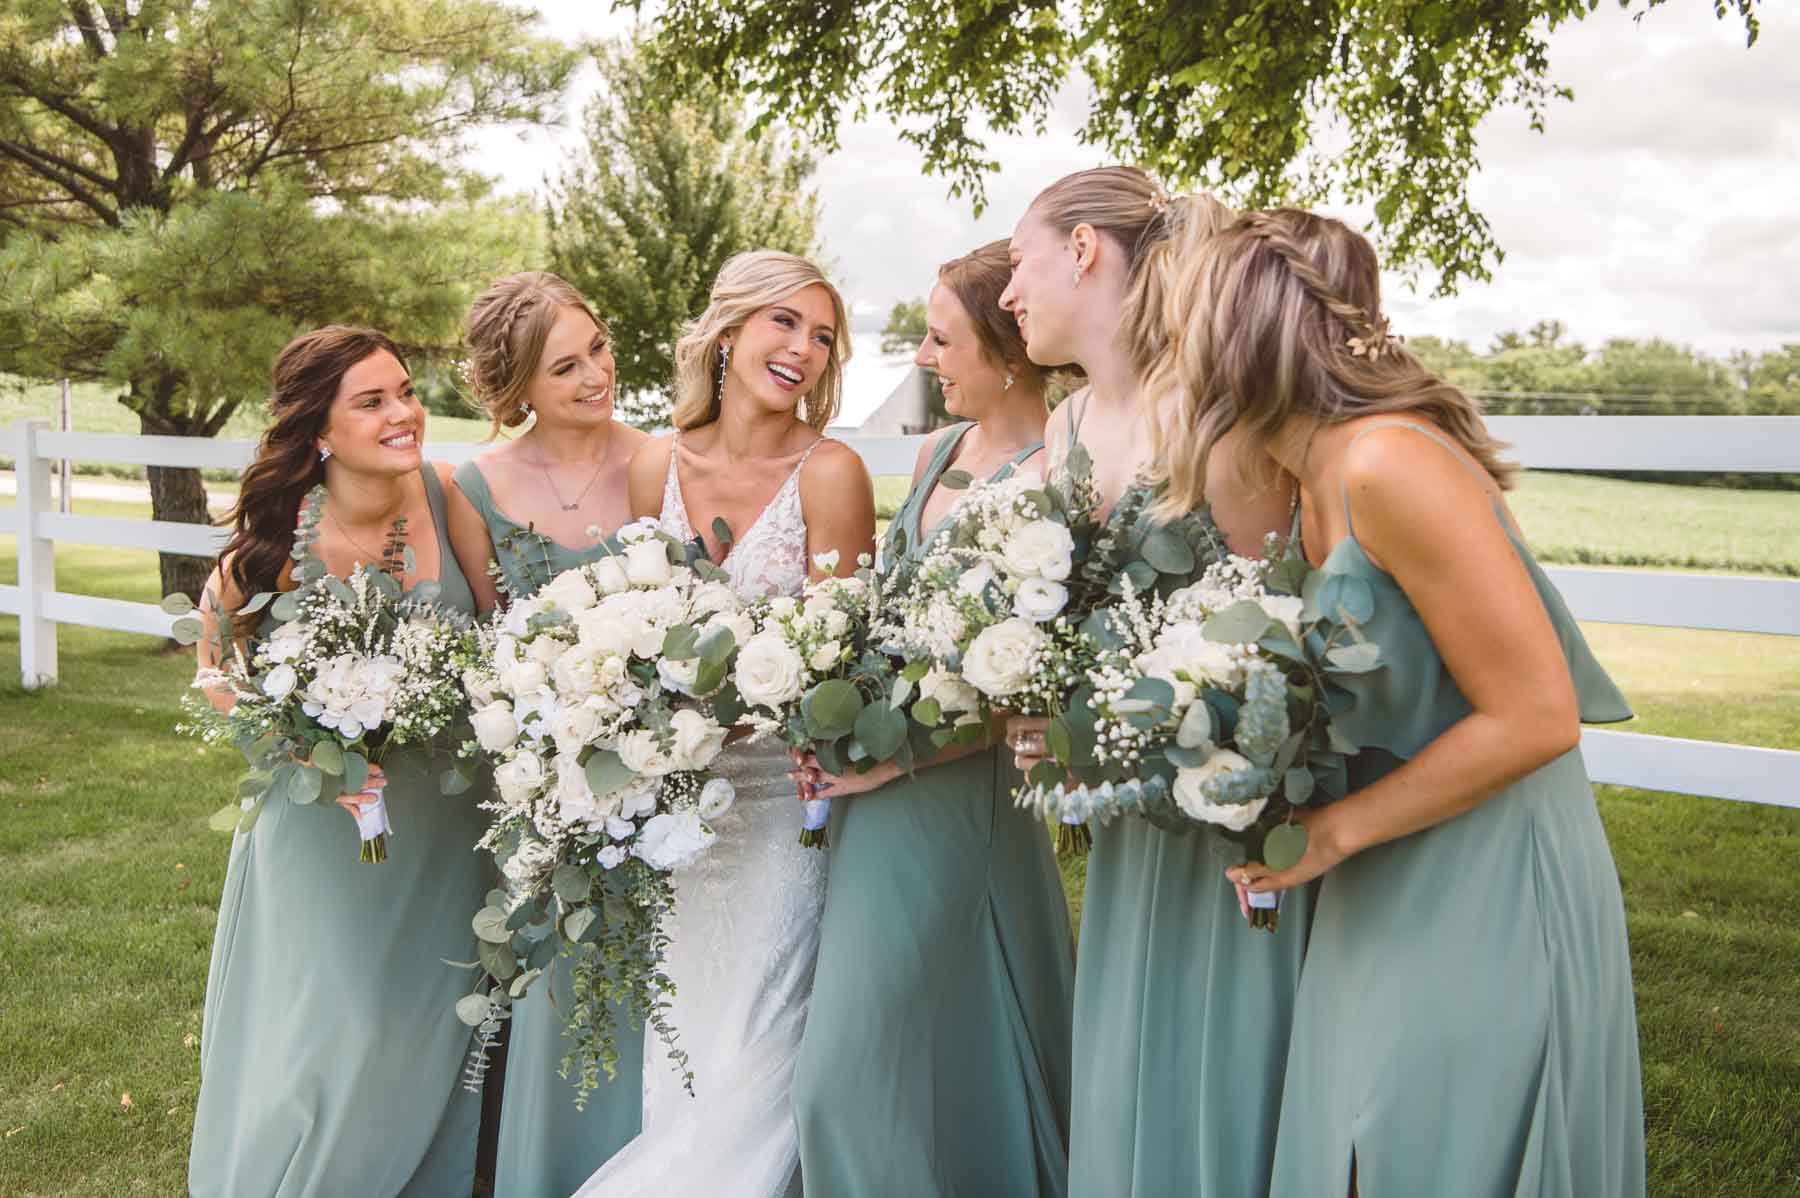 Bride smiling with her bridesmaids